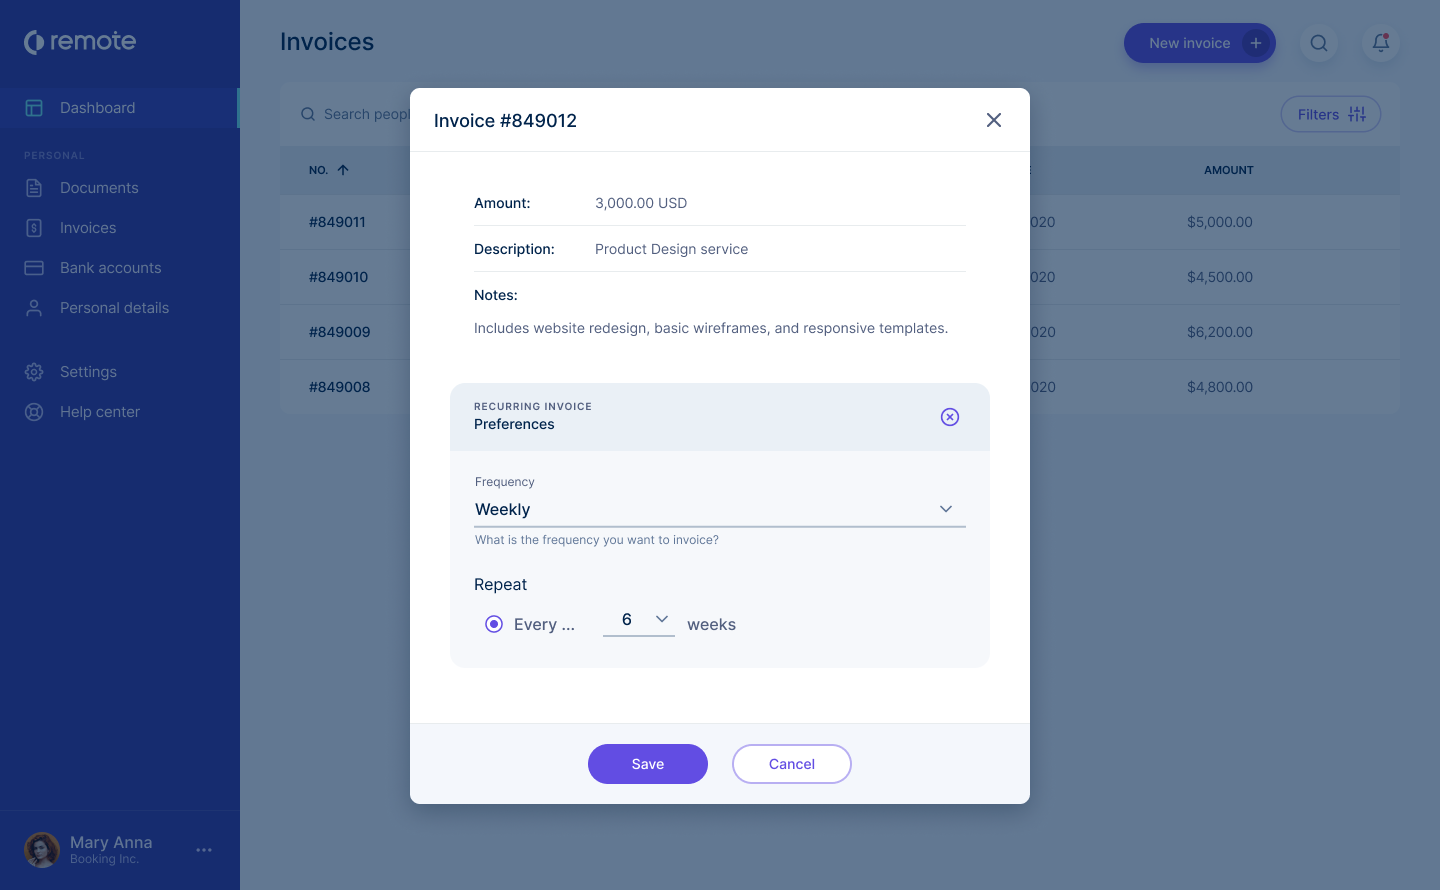 Preview of a recurring invoice on Remote's platform